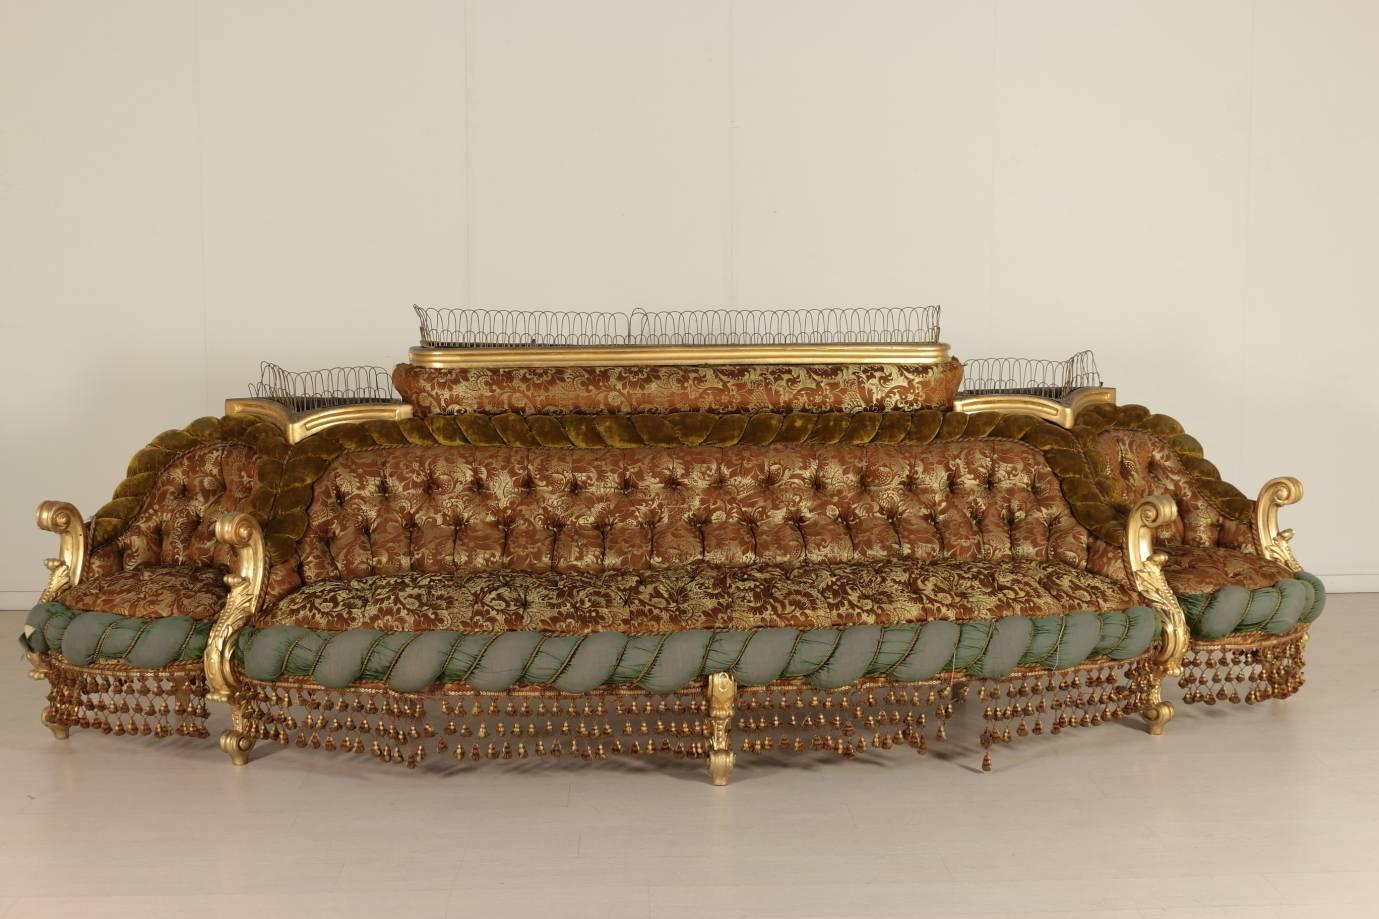 A late 19th century Baroque style padded sitting room. Carved and gilded wood. Refined capitonné velvet and satin damasked padding with fringes. Includes: Pair of armchairs (85 x 72 x 60), group of four chairs (91 x 65 x 53), corner sofa (100 x